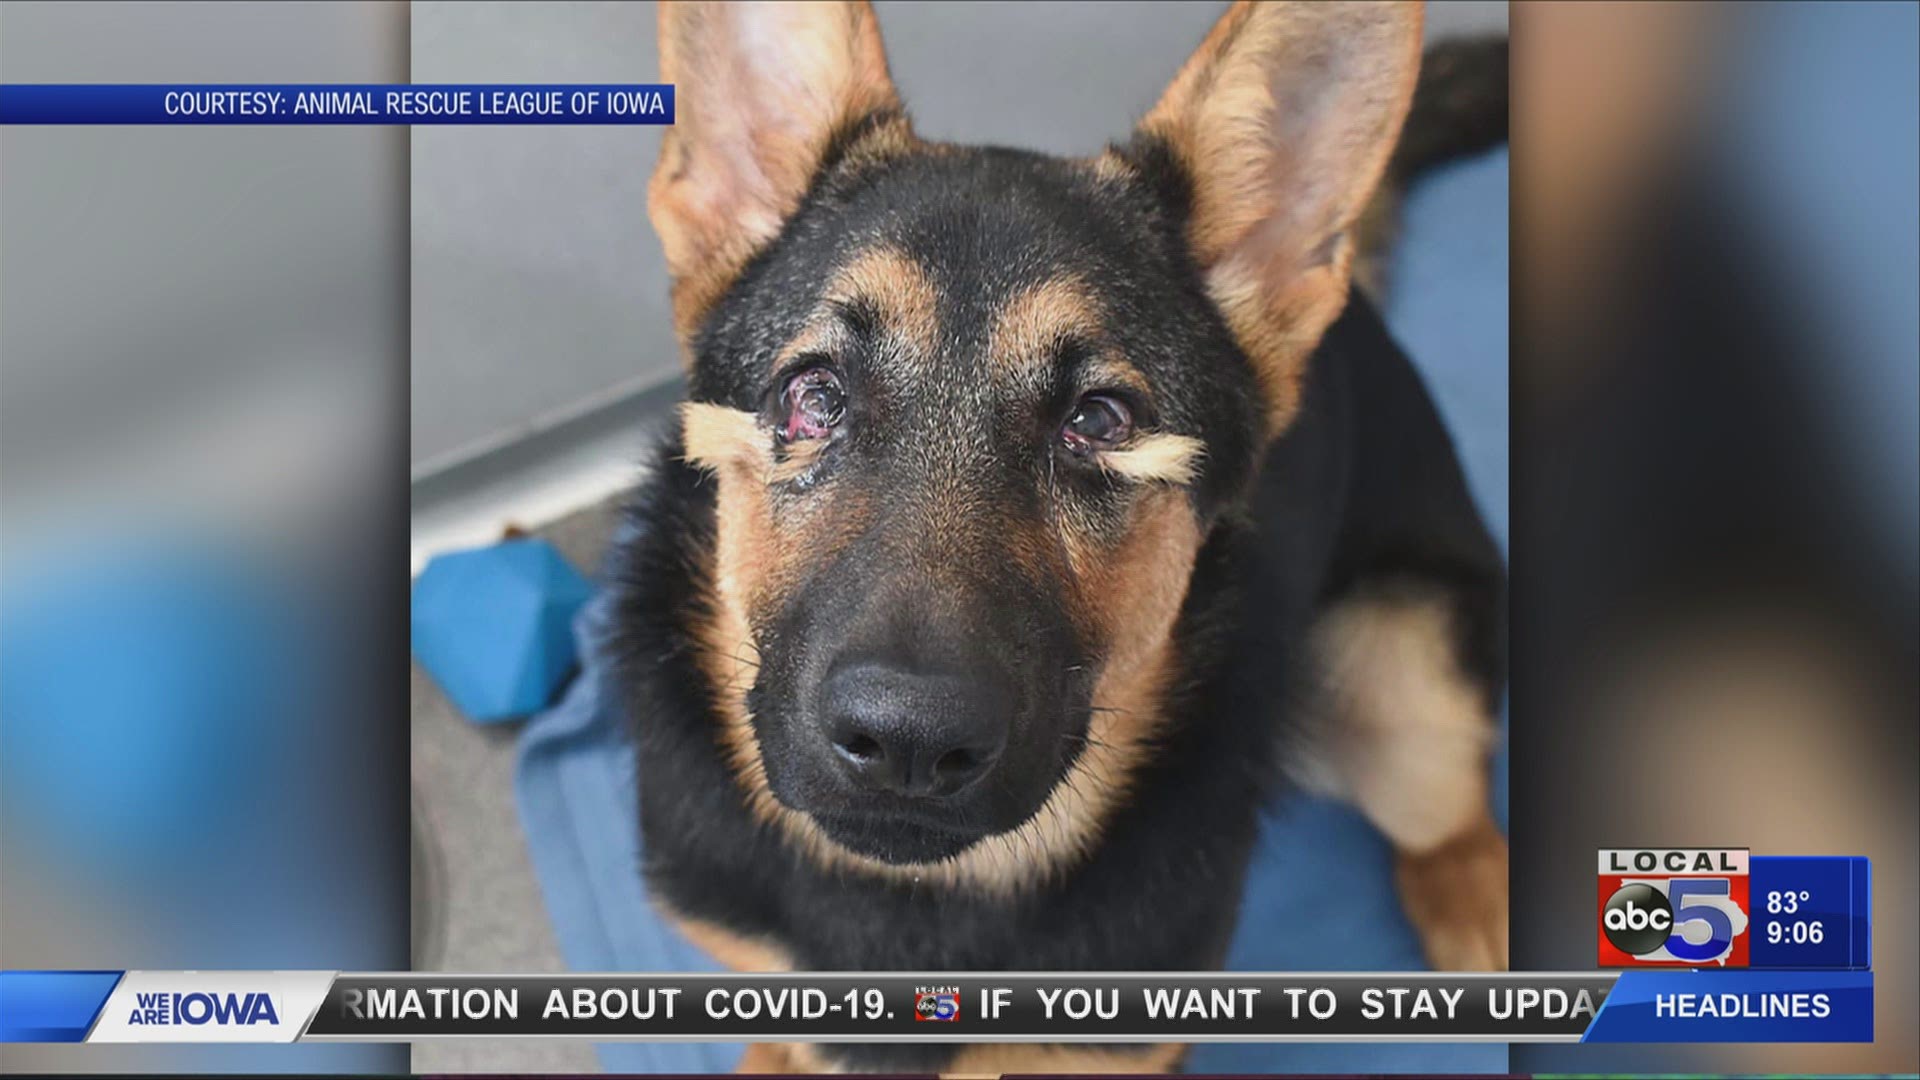 The Animal Rescue League of Iowa is looking for help when it comes to caring for a puppy with eye problems.